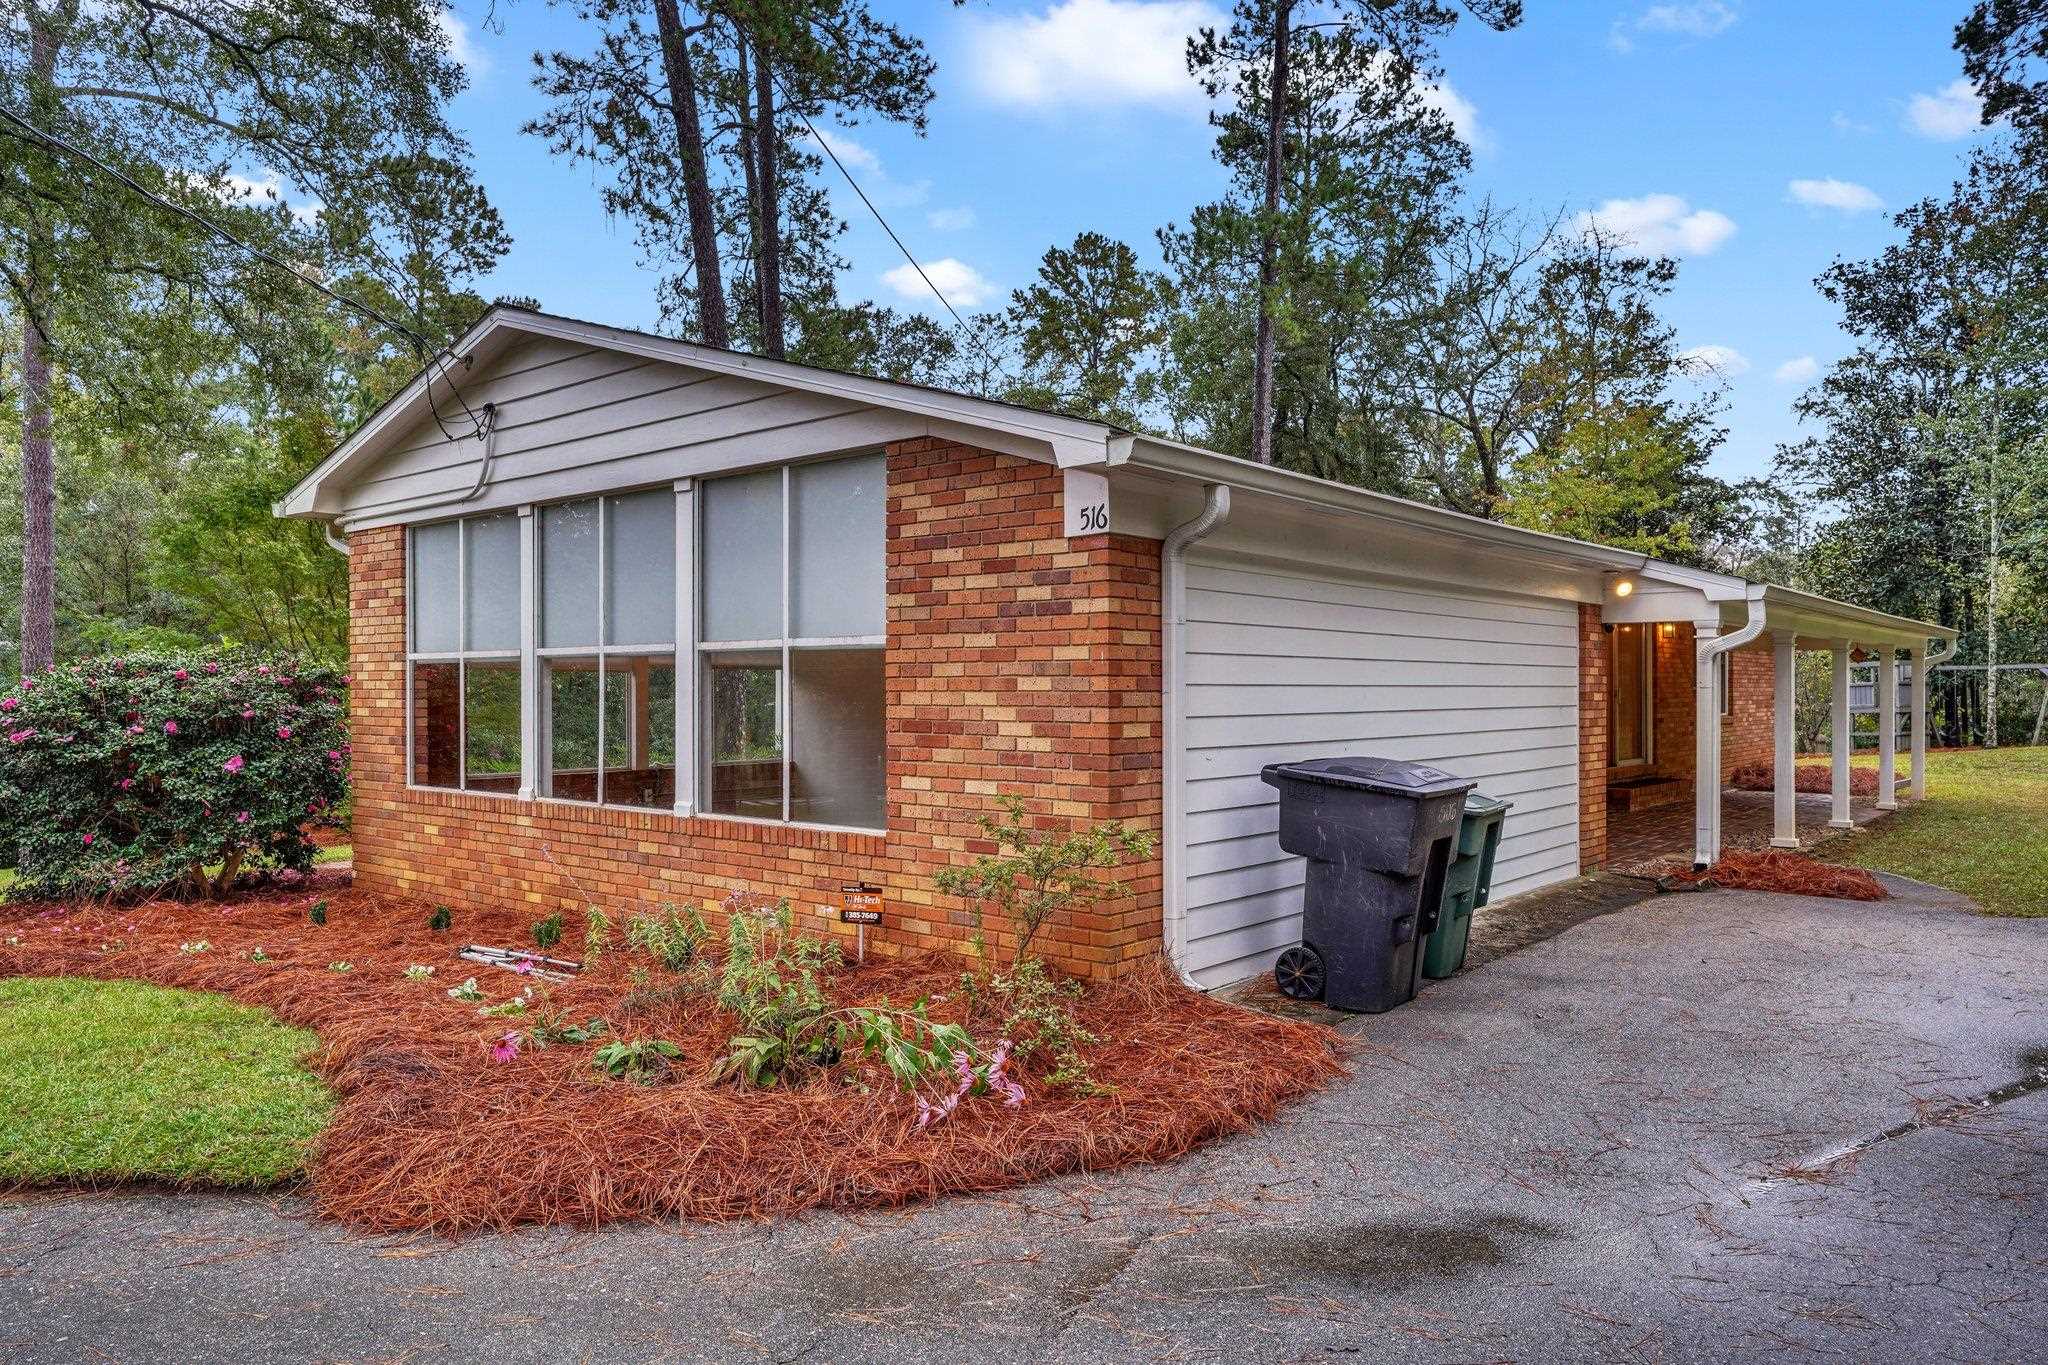 516 Middlebrooks Circle,TALLAHASSEE,Florida 32312,3 Bedrooms Bedrooms,2 BathroomsBathrooms,Detached single family,516 Middlebrooks Circle,369306